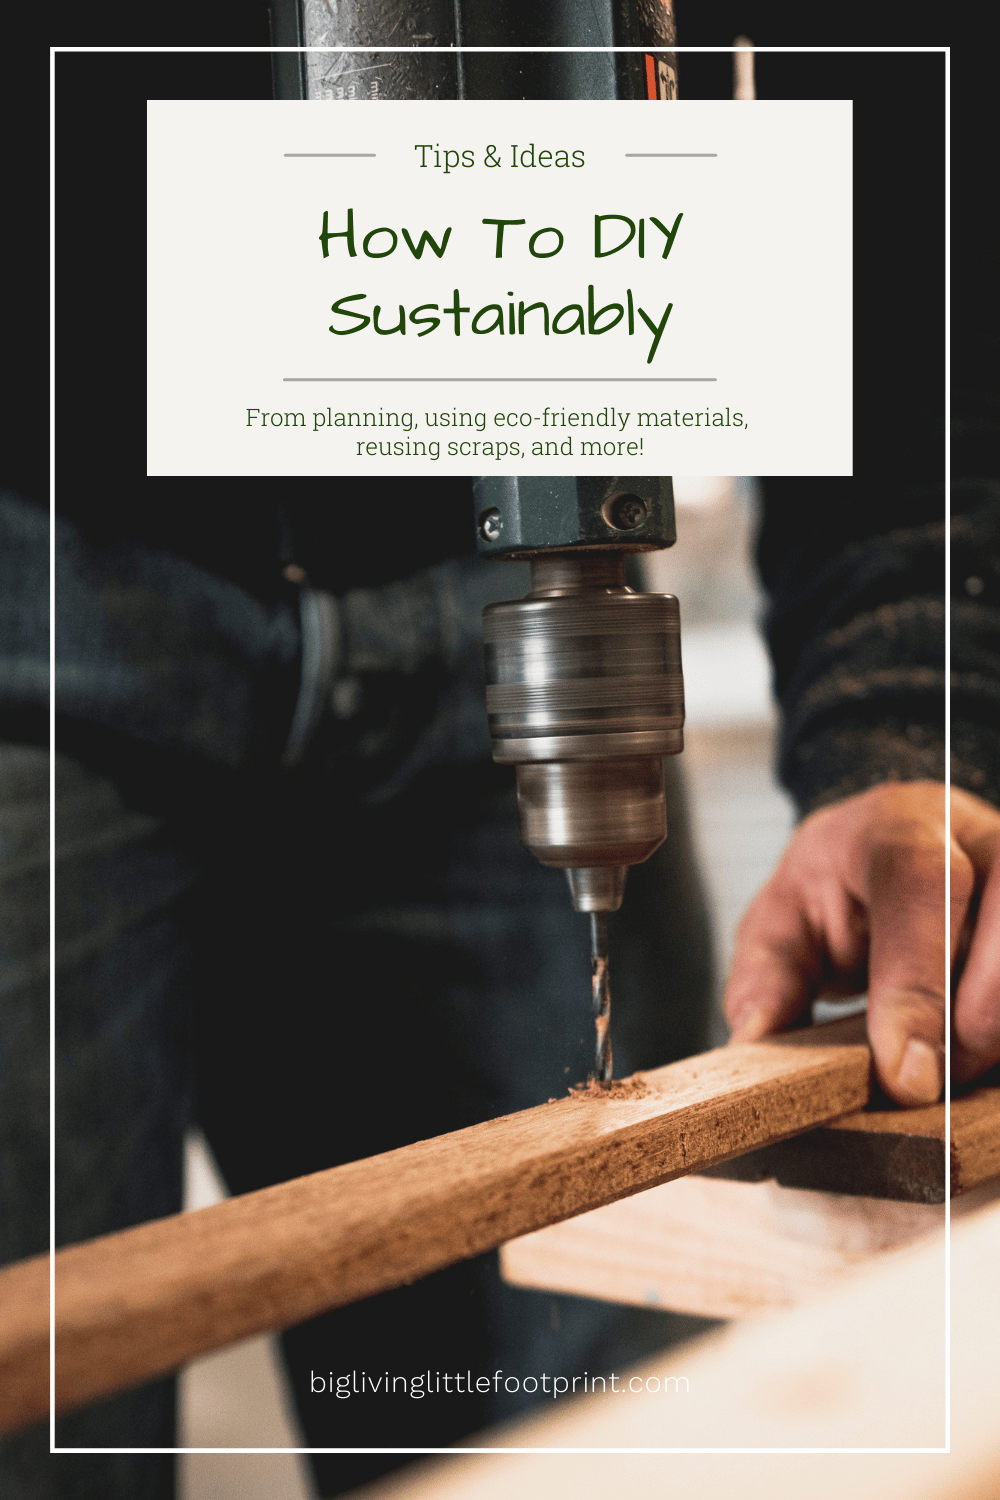 How To DIY Sustainably -Tips & Ideas